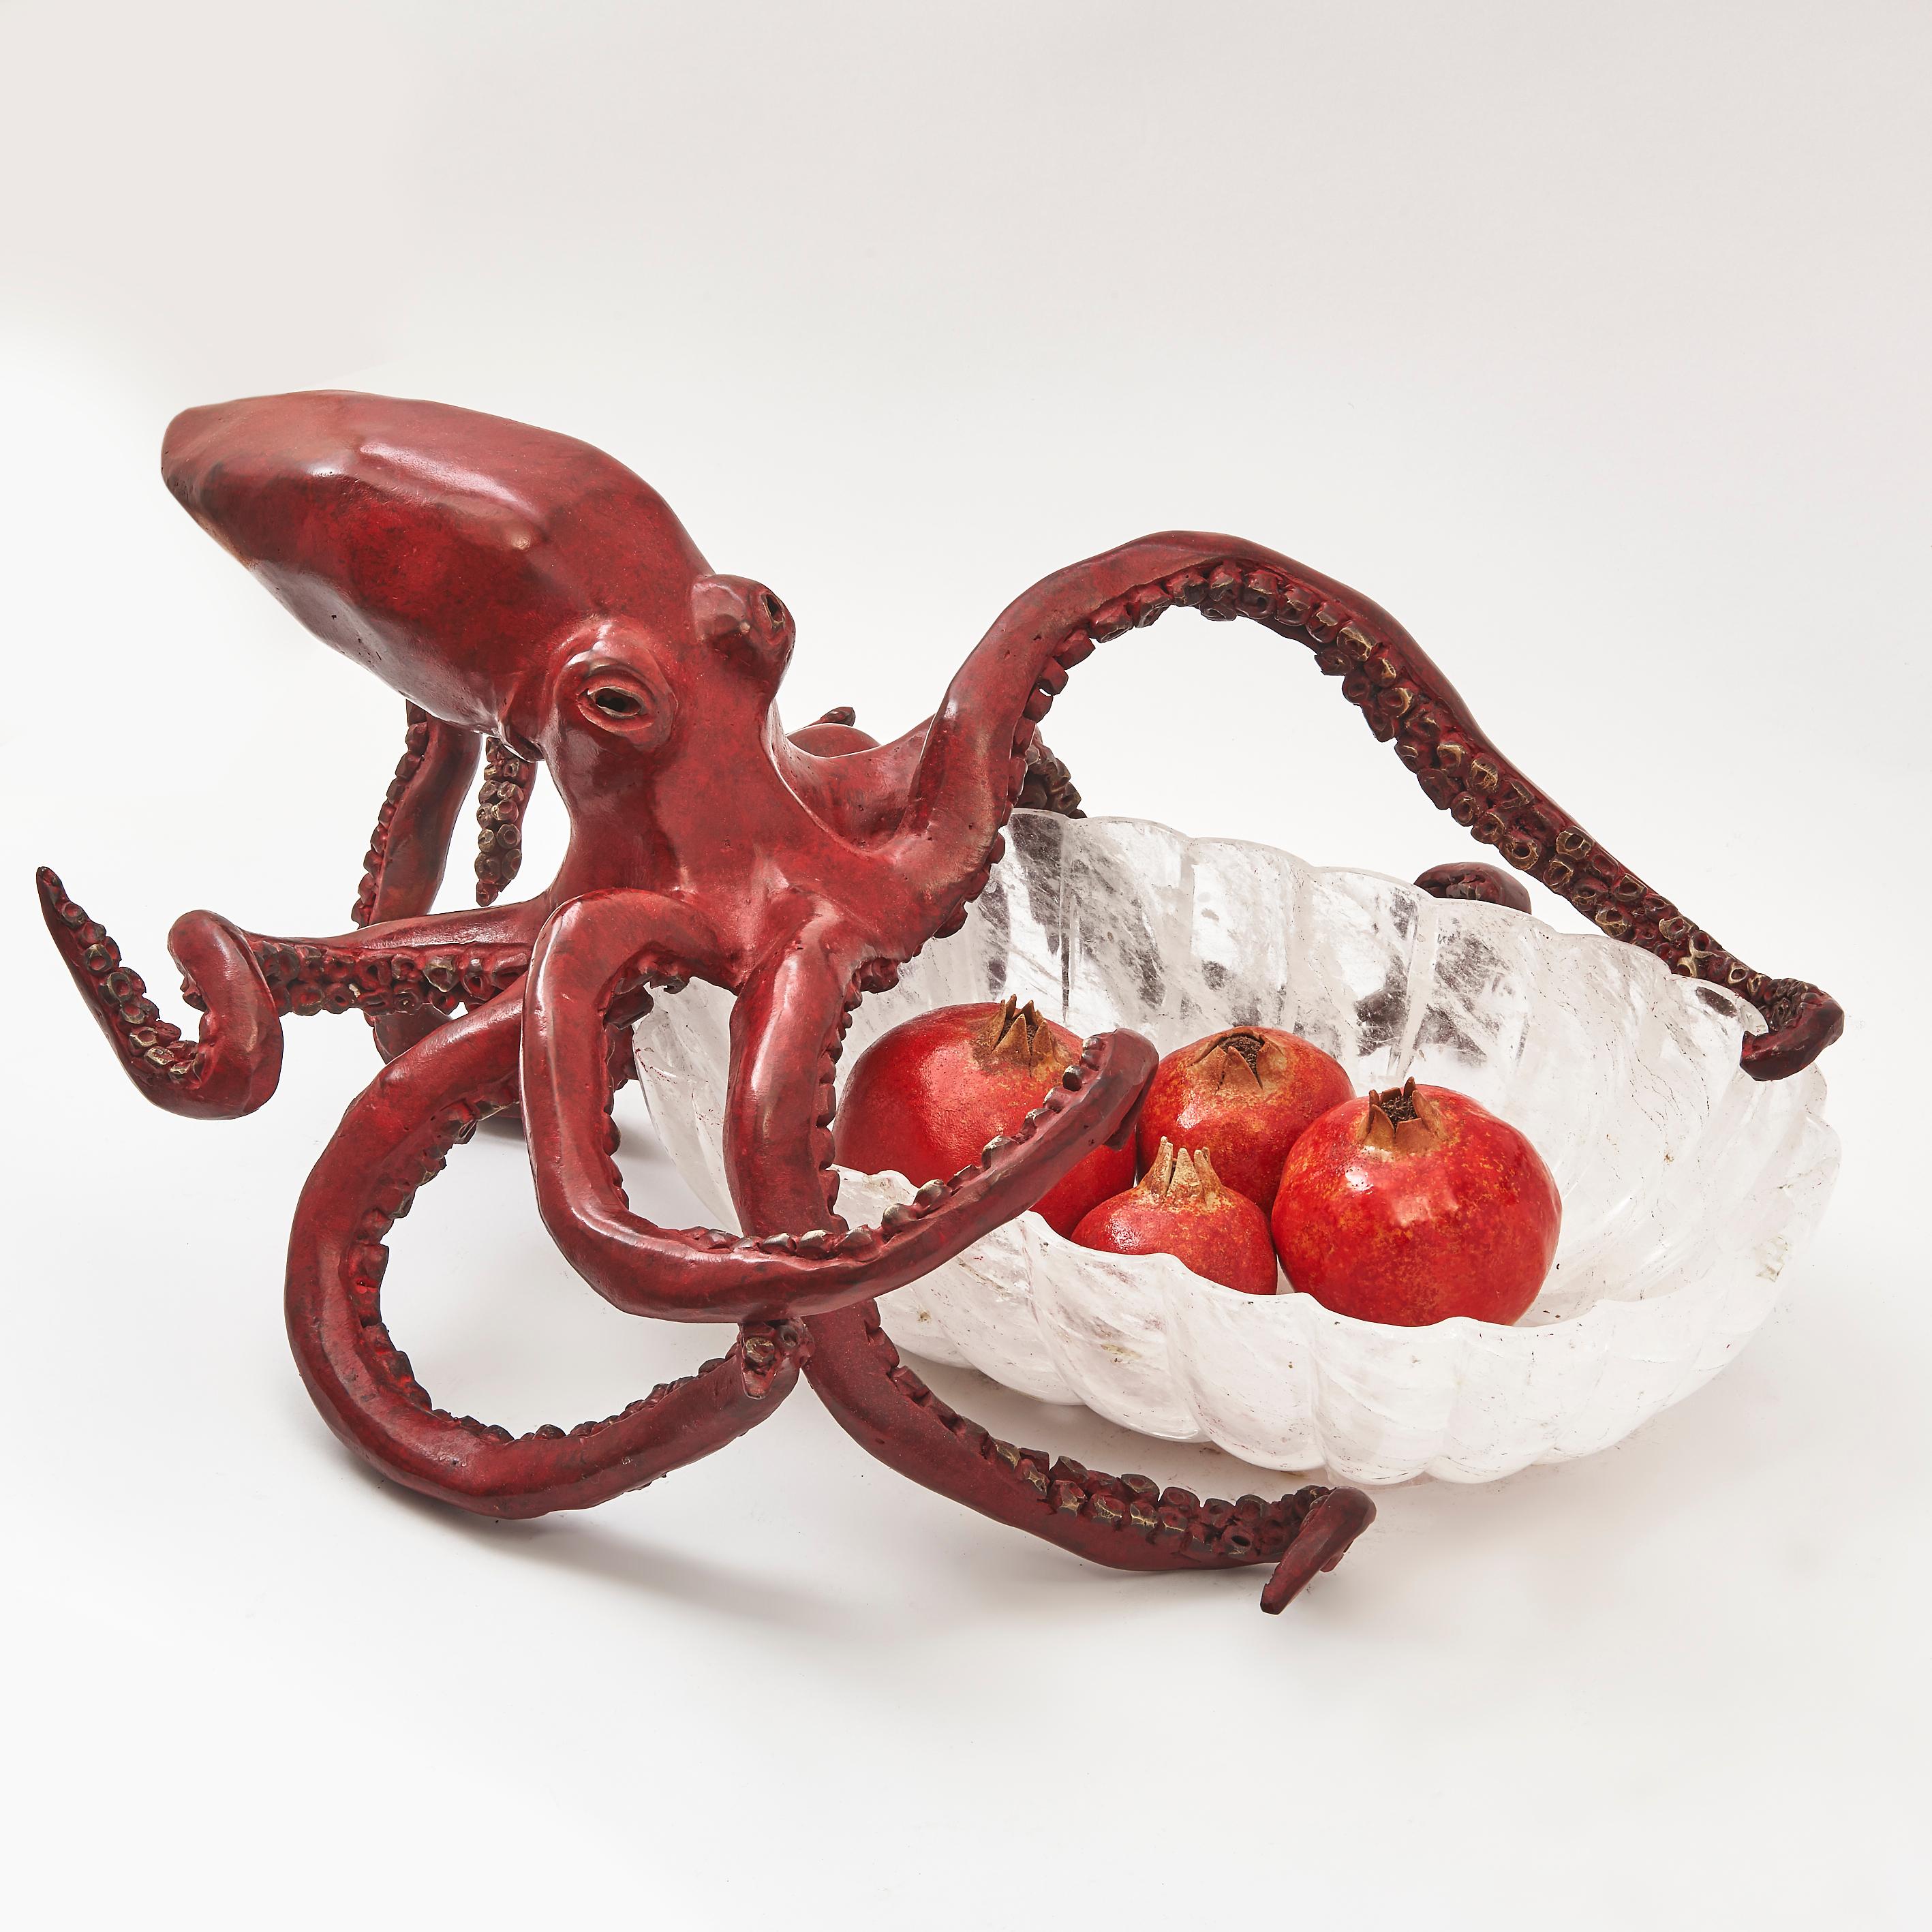 An impressive centre piece featuring a Bronze octopus with red colouring and polished bronze suckers, tentacles encircling a contemporary rock crystal bowl. Signed and dated the Belgian artist Paula Swinnen, 2019.
Non-export (UK) sales are subject